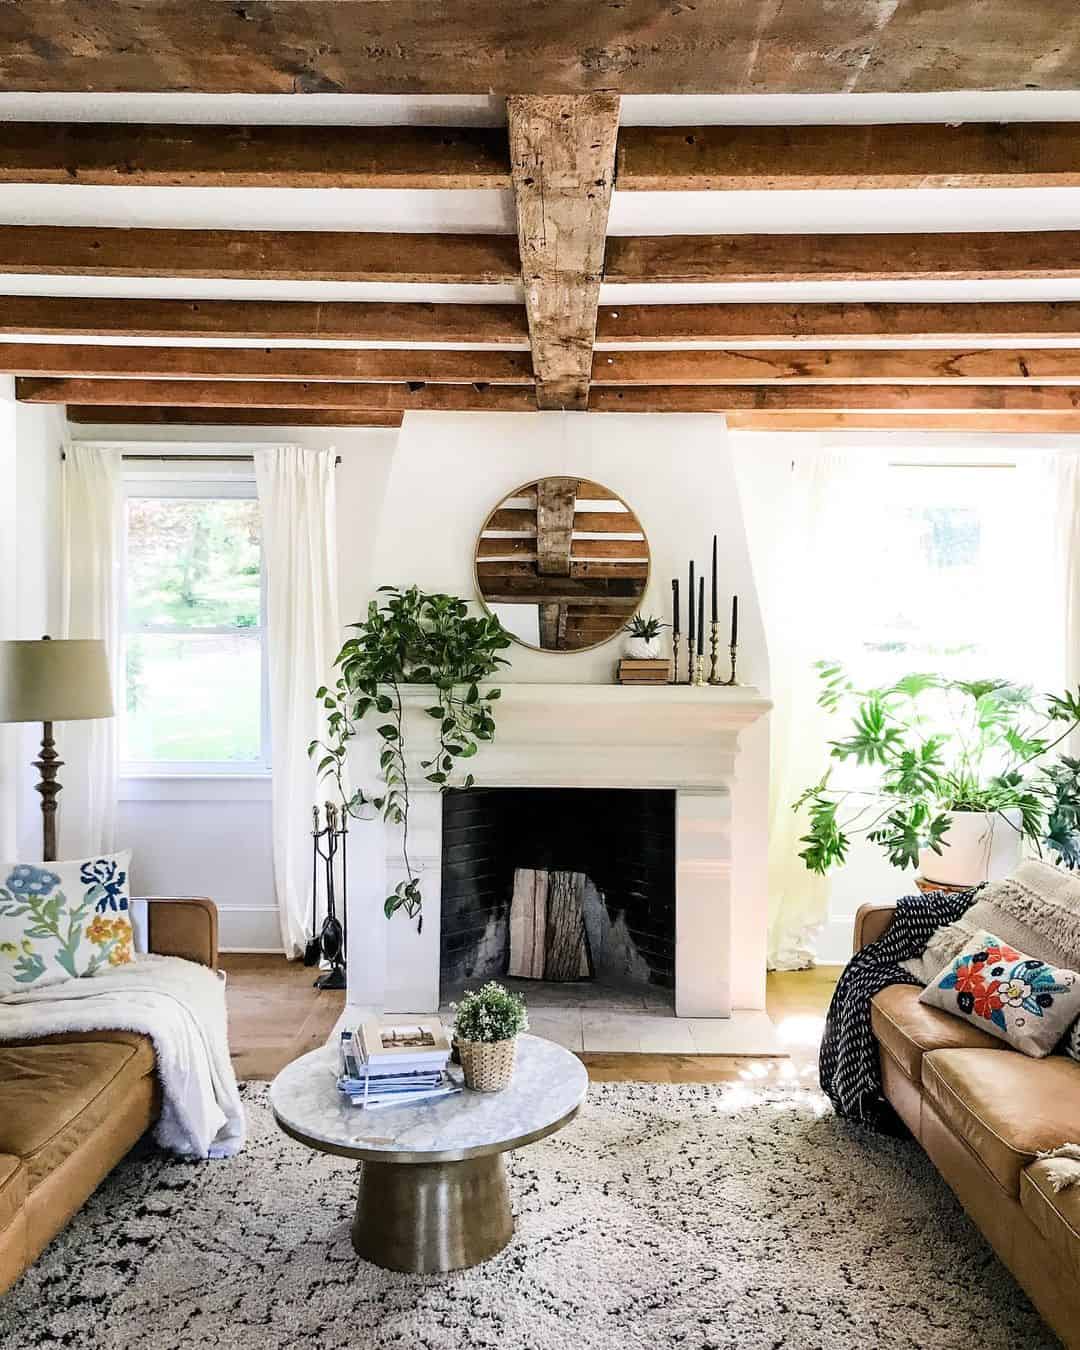 Cozy Lodge Style Living Room With Exposed Ceiling Beams - Soul & Lane